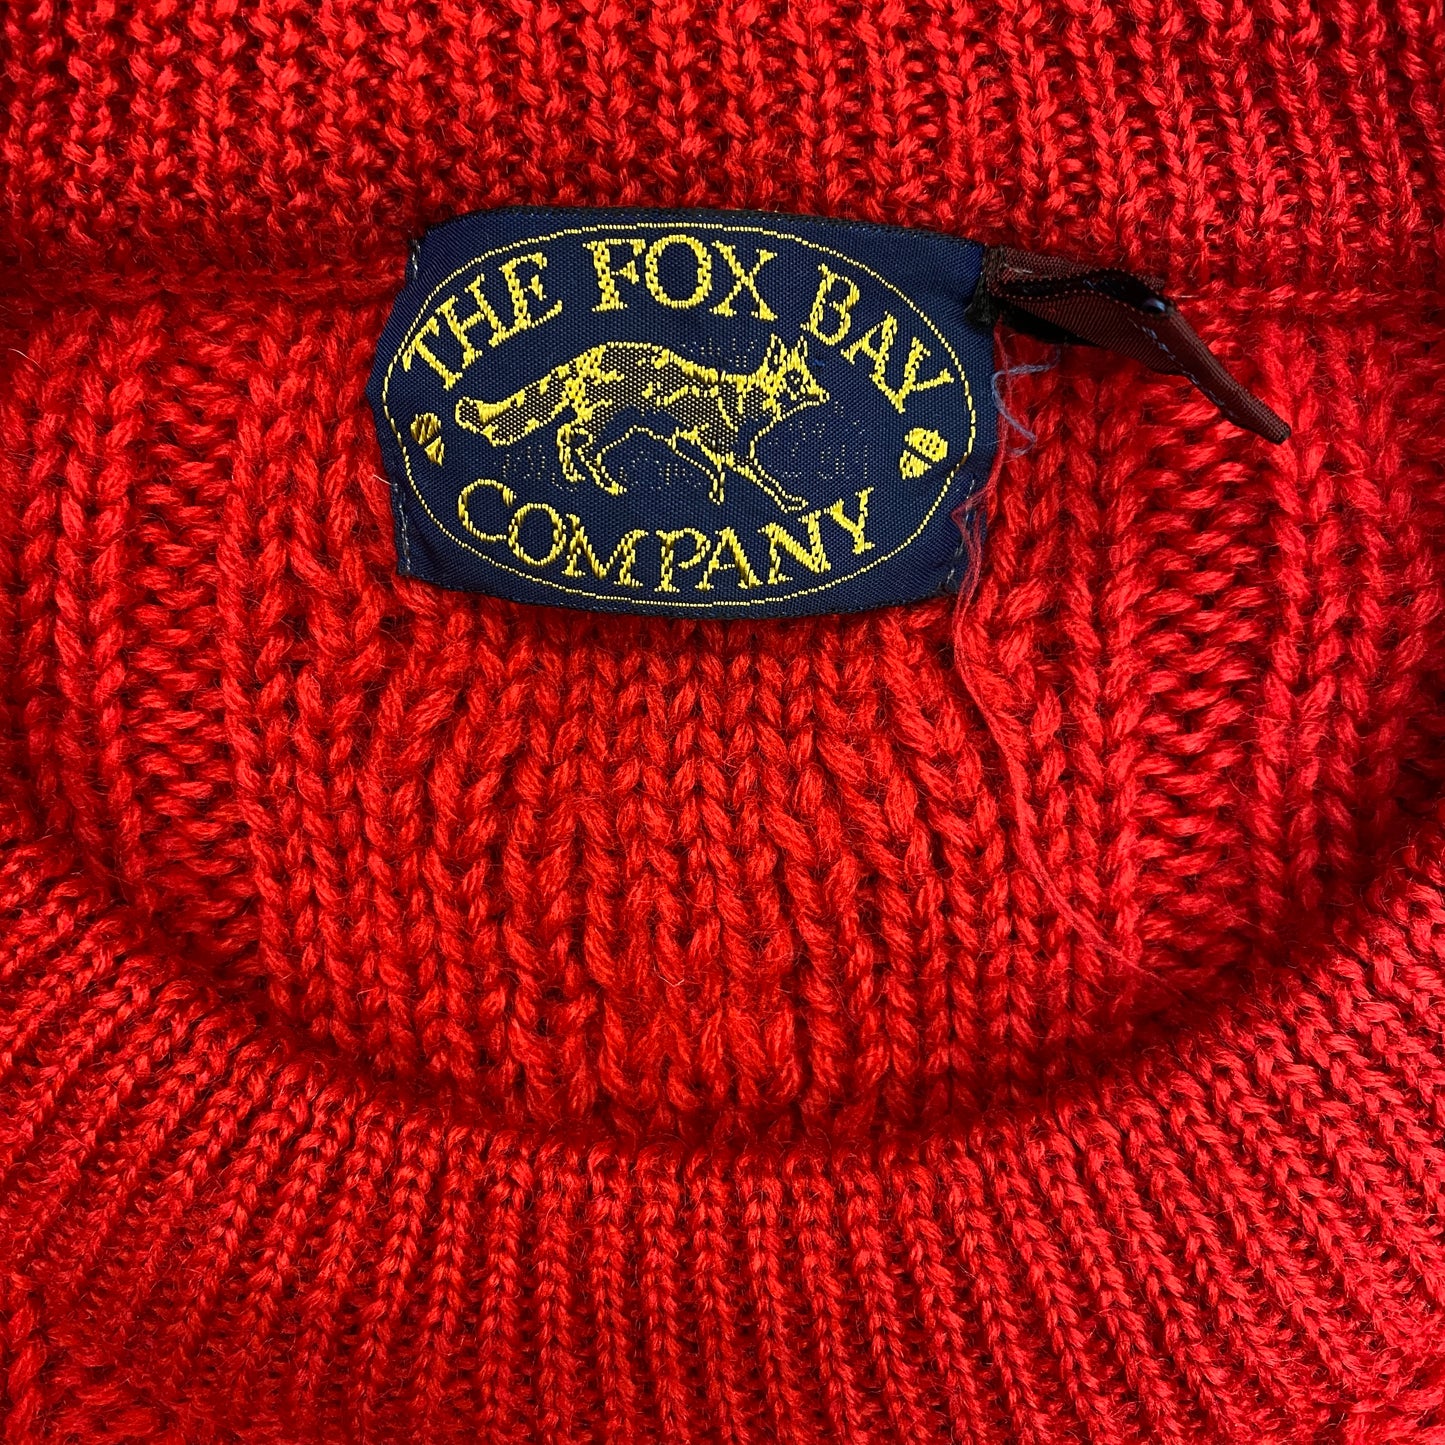 1990s The Fox Bay Company Red Cable Knit Sweater - Size XL